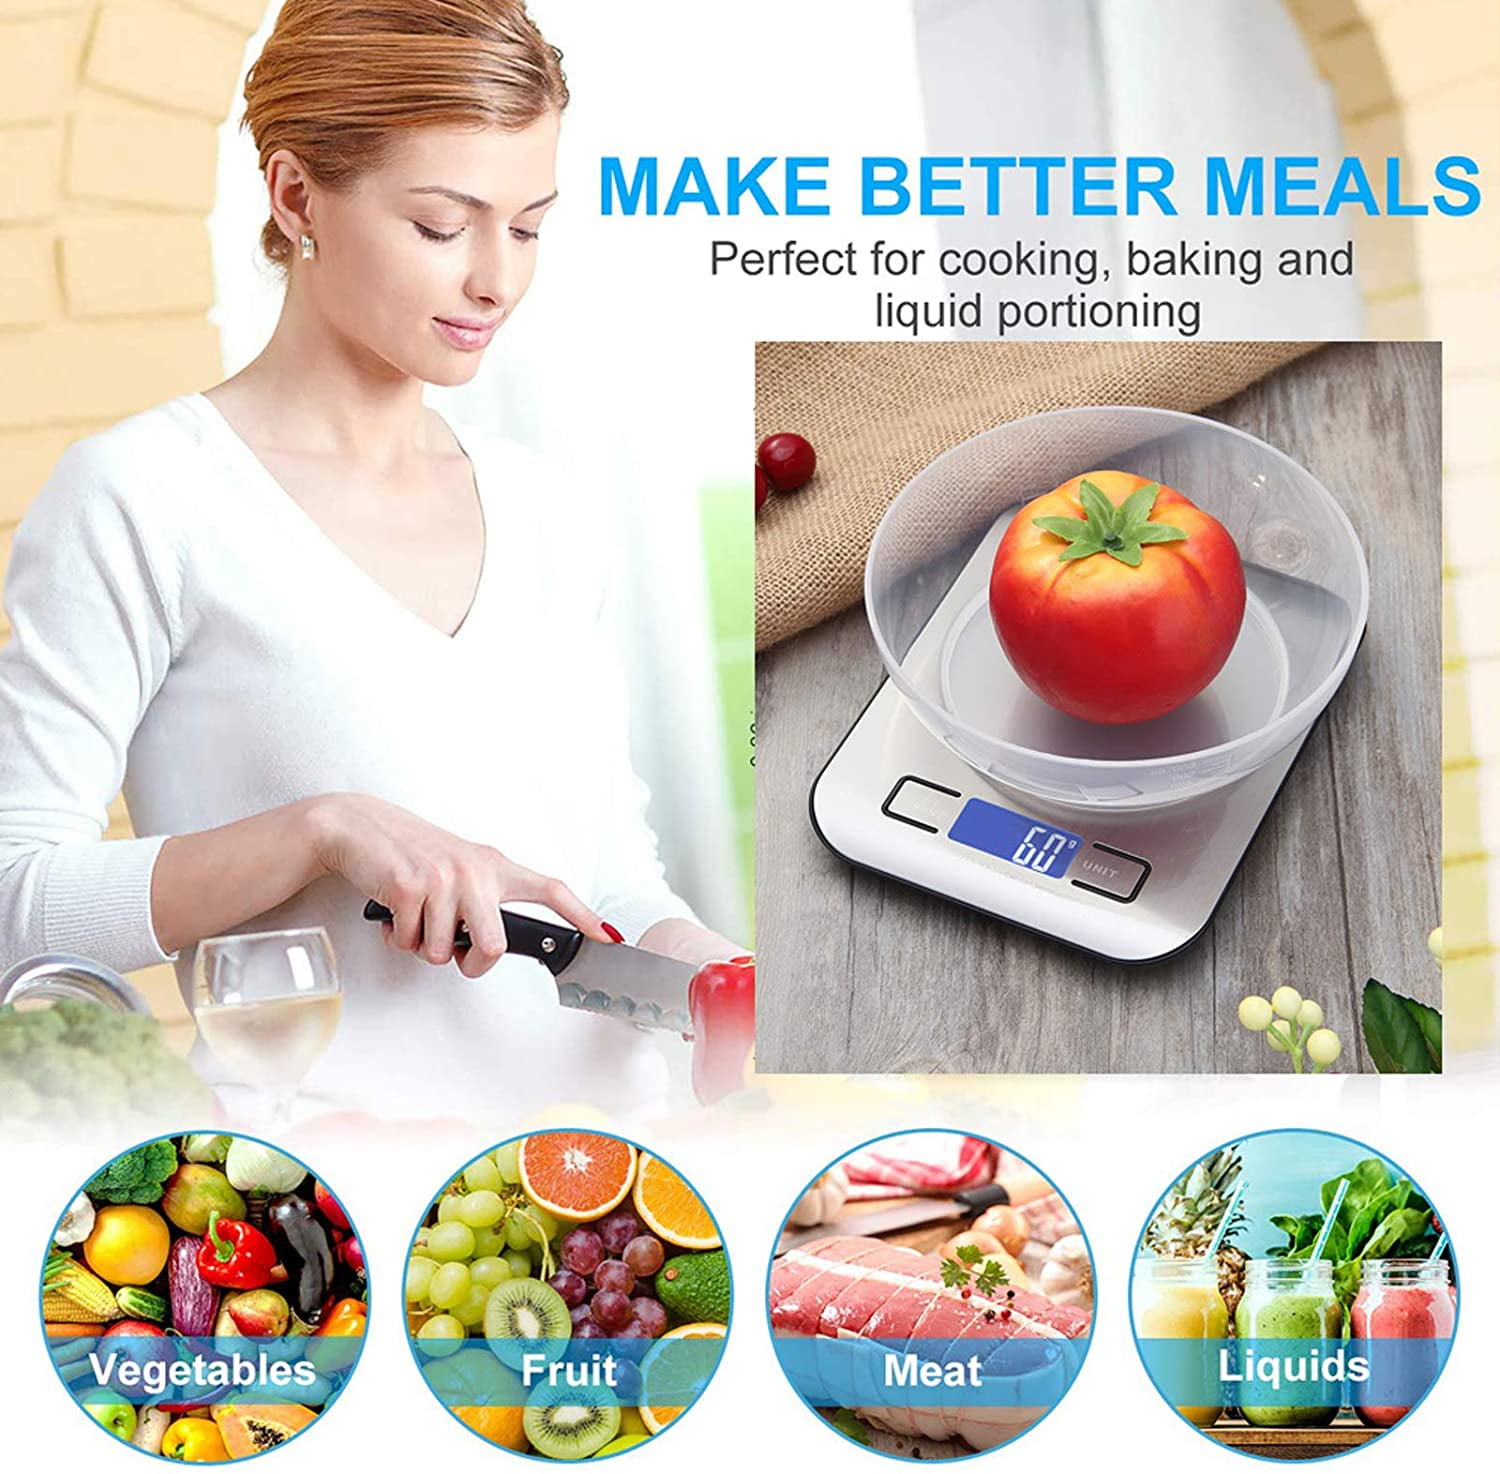 Zulay Kitchen Precision Digital Food Scale Weight Grams and Oz, LB, KG, ML,  1 - Gerbes Super Markets